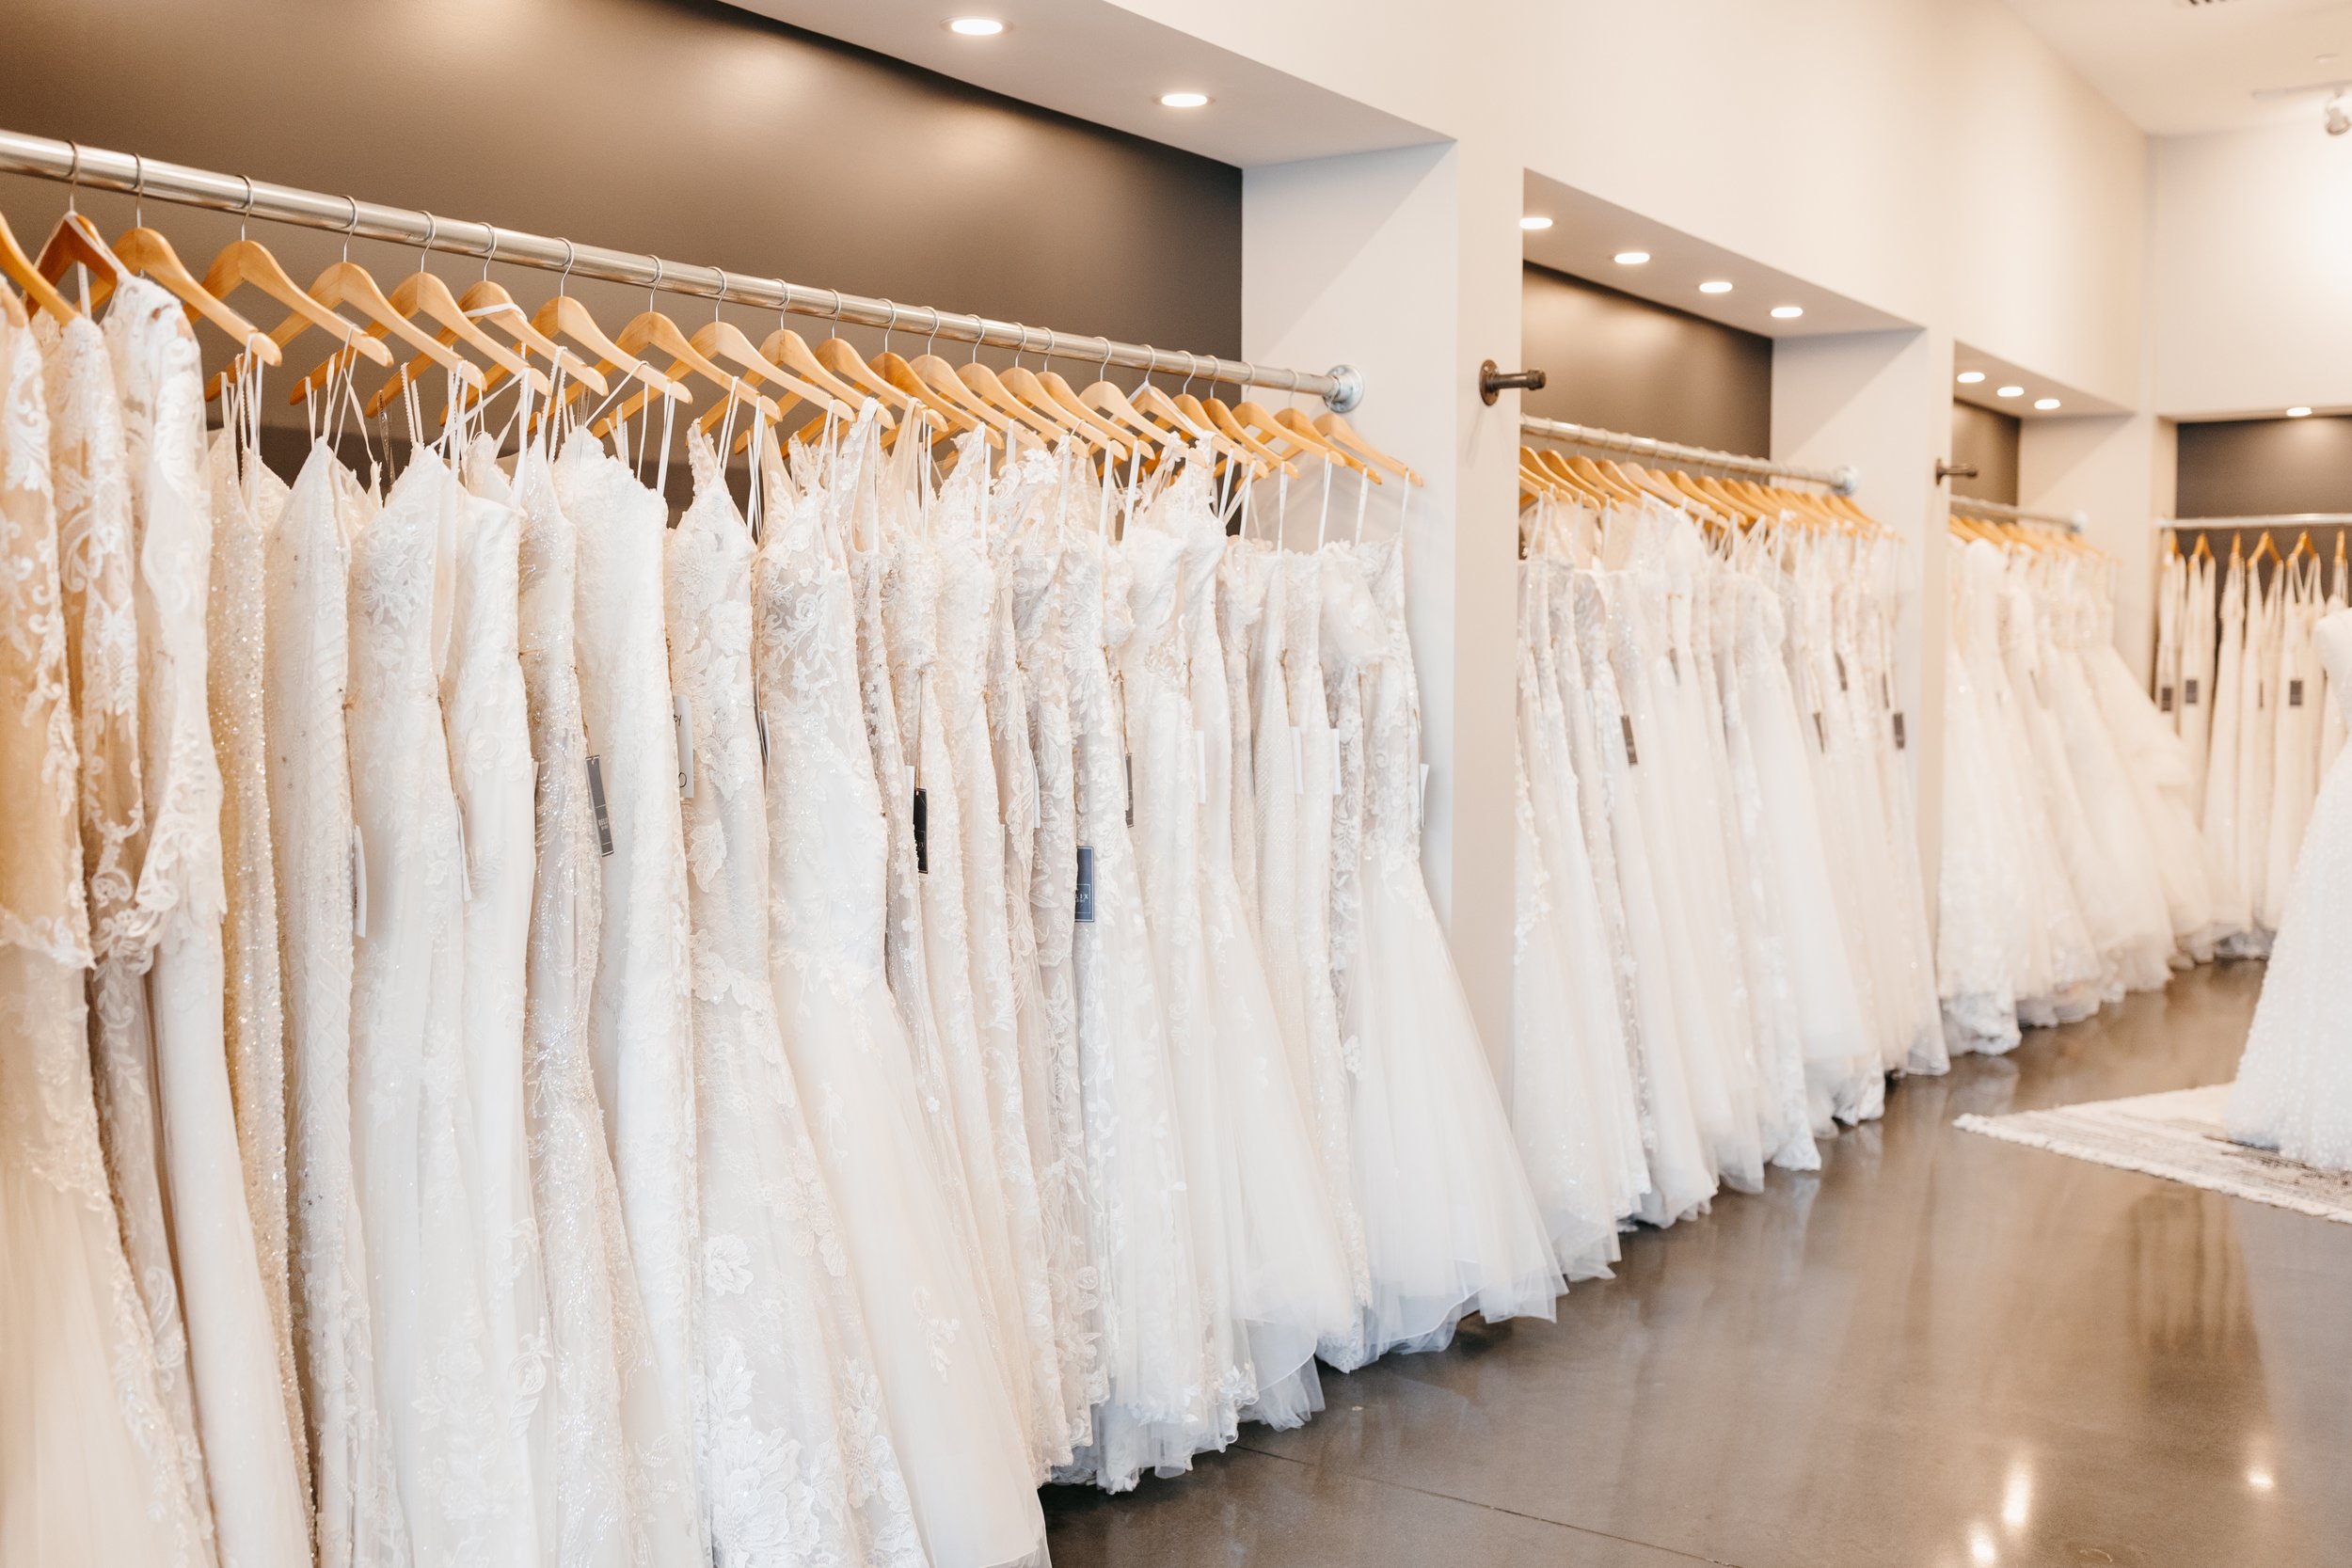 10 Utah Bridal Boutiques and Wedding Dress Designers - Wedding Gowns